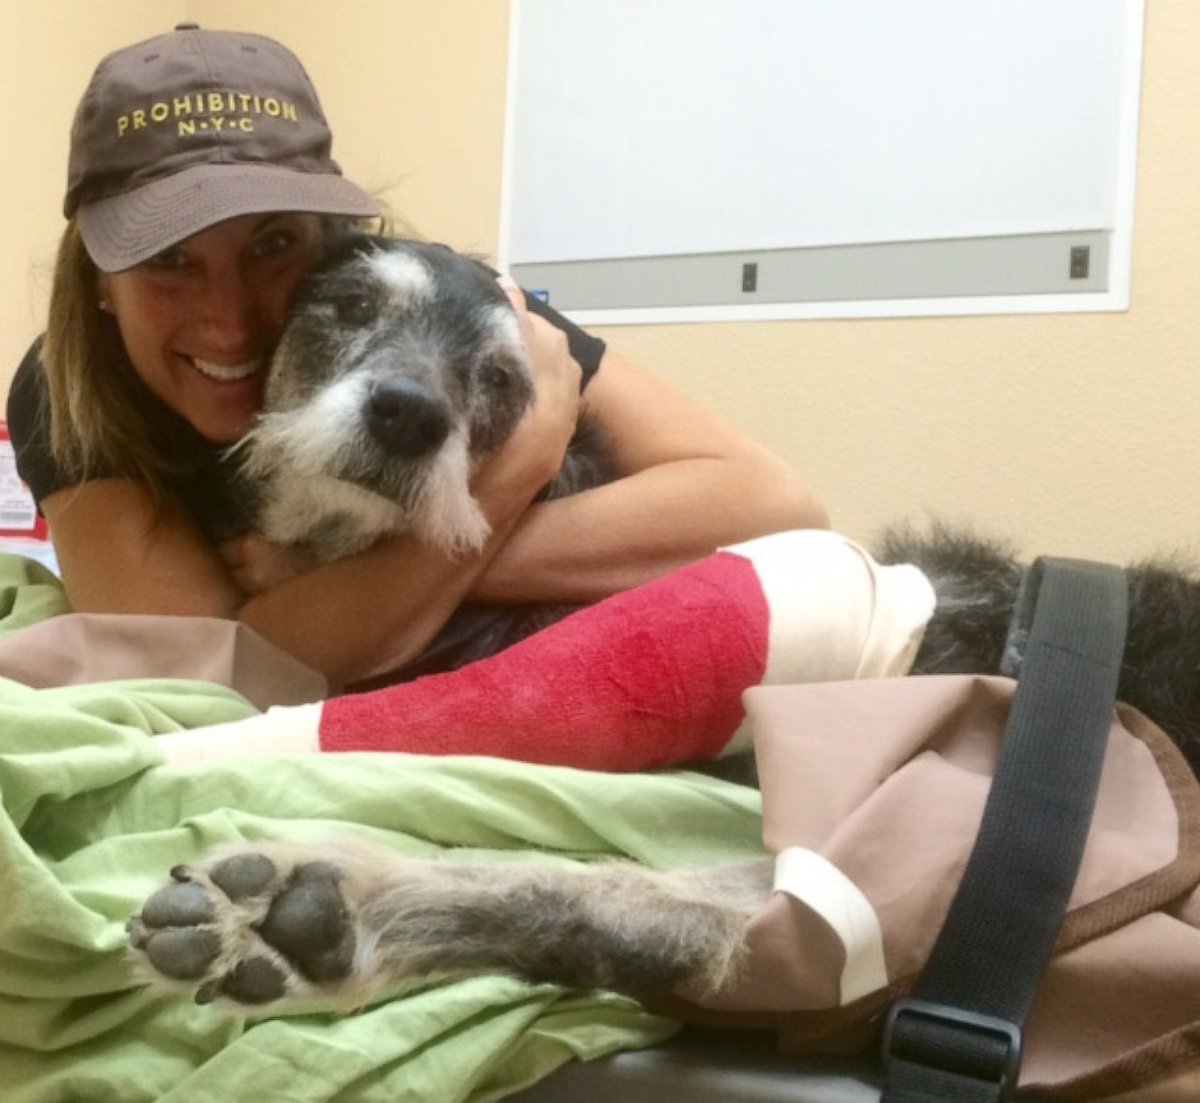 PHOTO: Ike, a dog in Hawthorne Calif. who is battling cancer, is seen with his owner Risa in this undated handout photo.